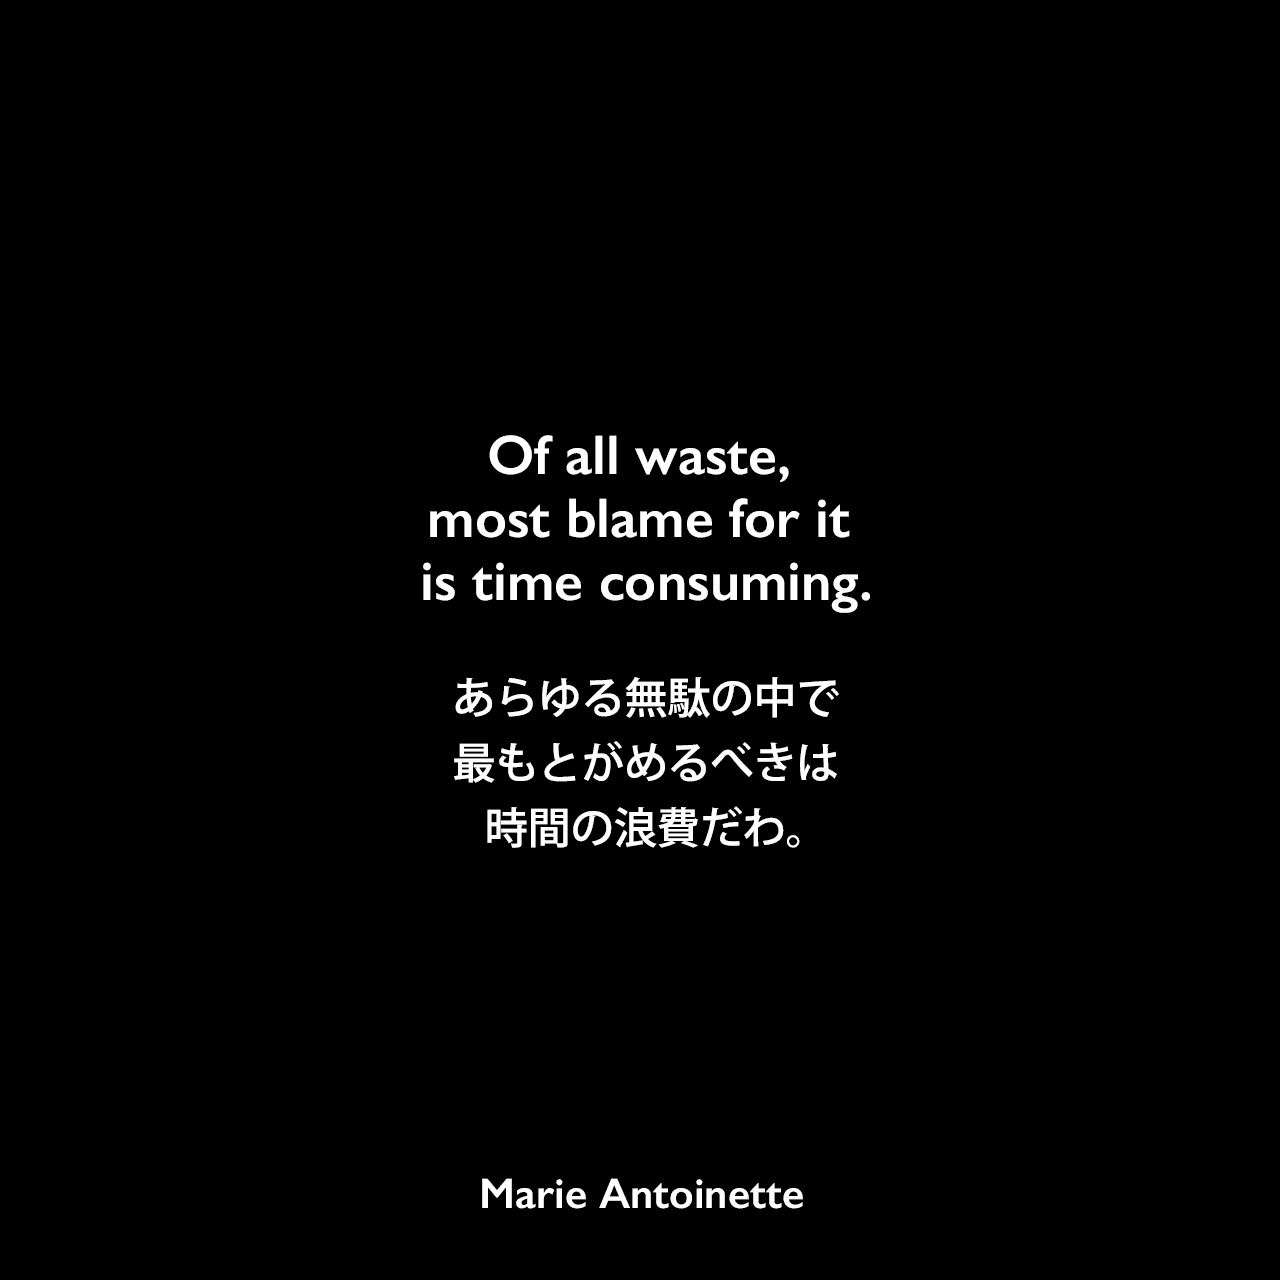 Of all waste, most blame for it is time consuming.あらゆる無駄の中で、最もとがめるべきは時間の浪費だわ。